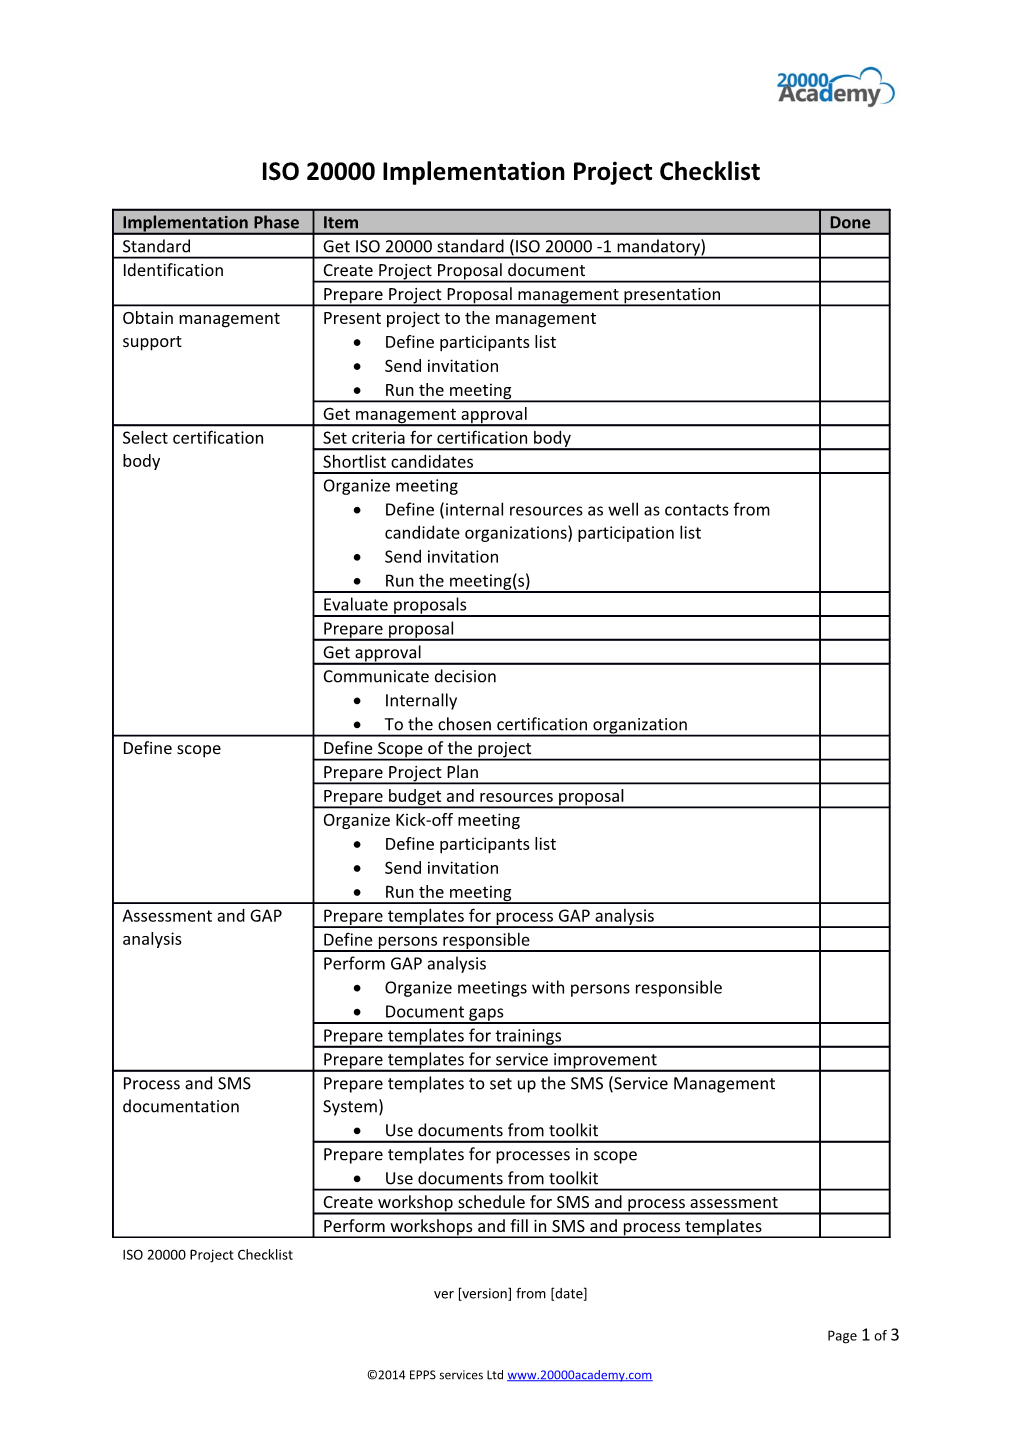 ISO 20000 Implementation Project Checklist